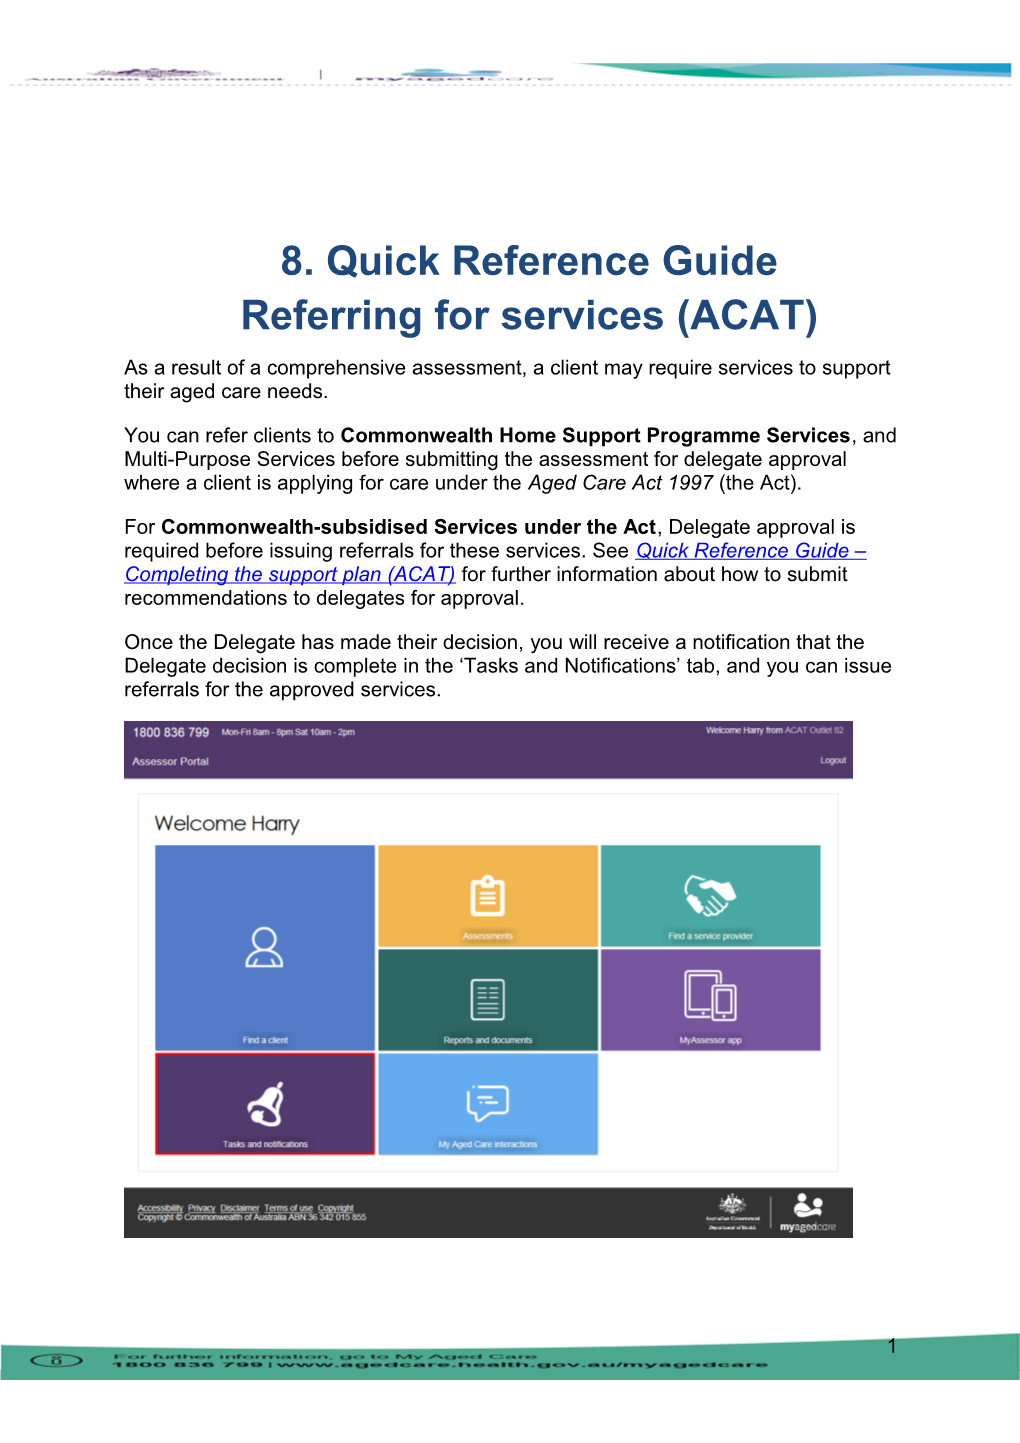 Quick Reference Guide Referring for Services (ACAT)